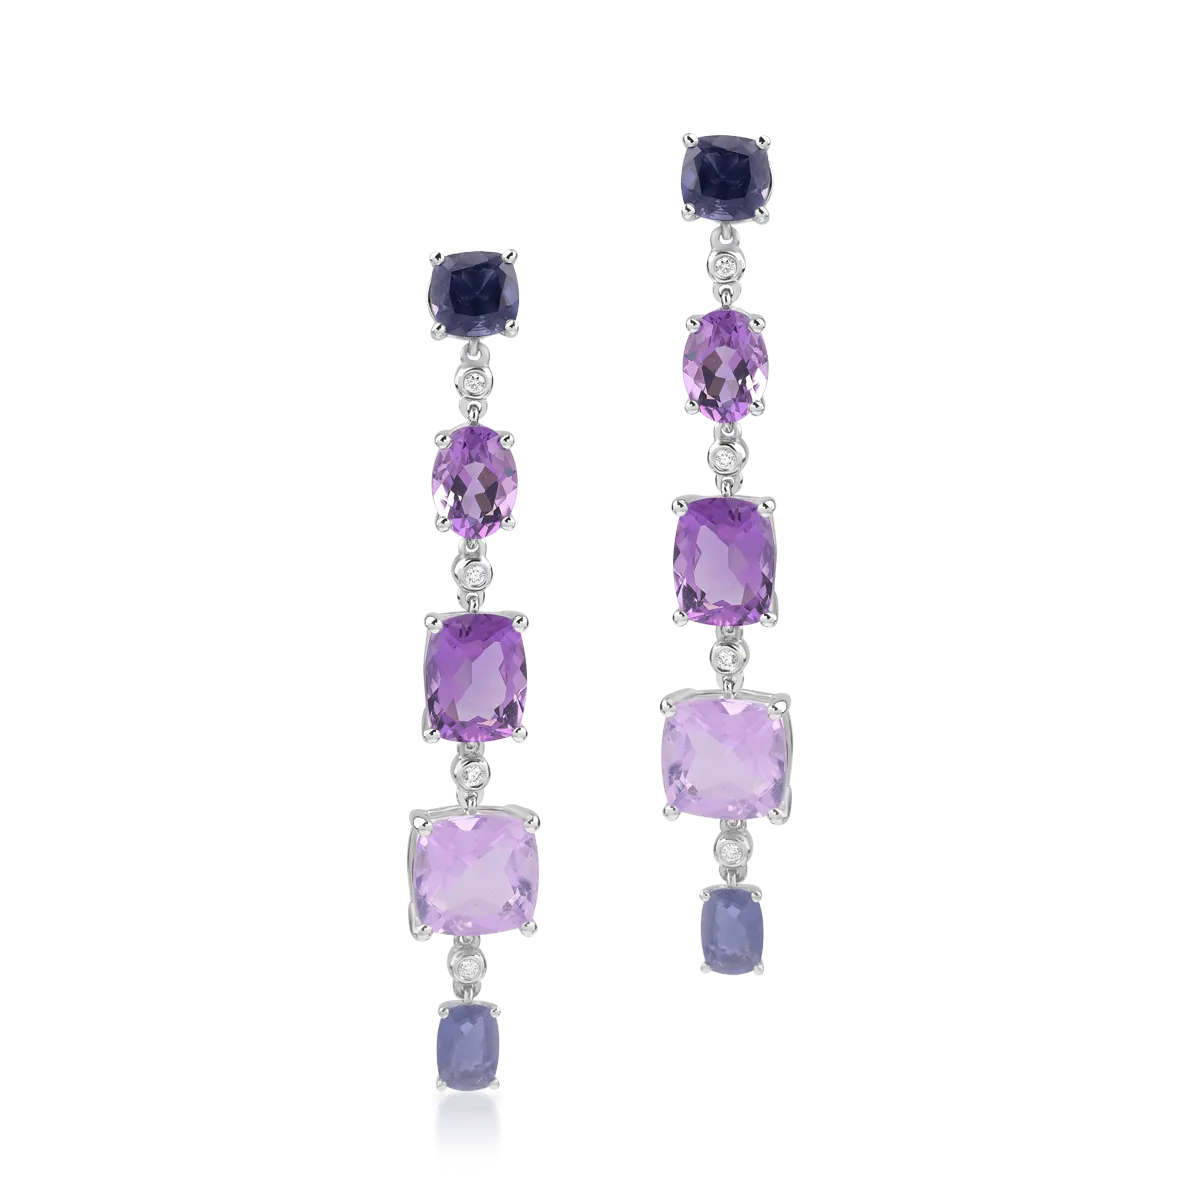 18K white gold earrings with 14.7ct precious and semiprecious stones